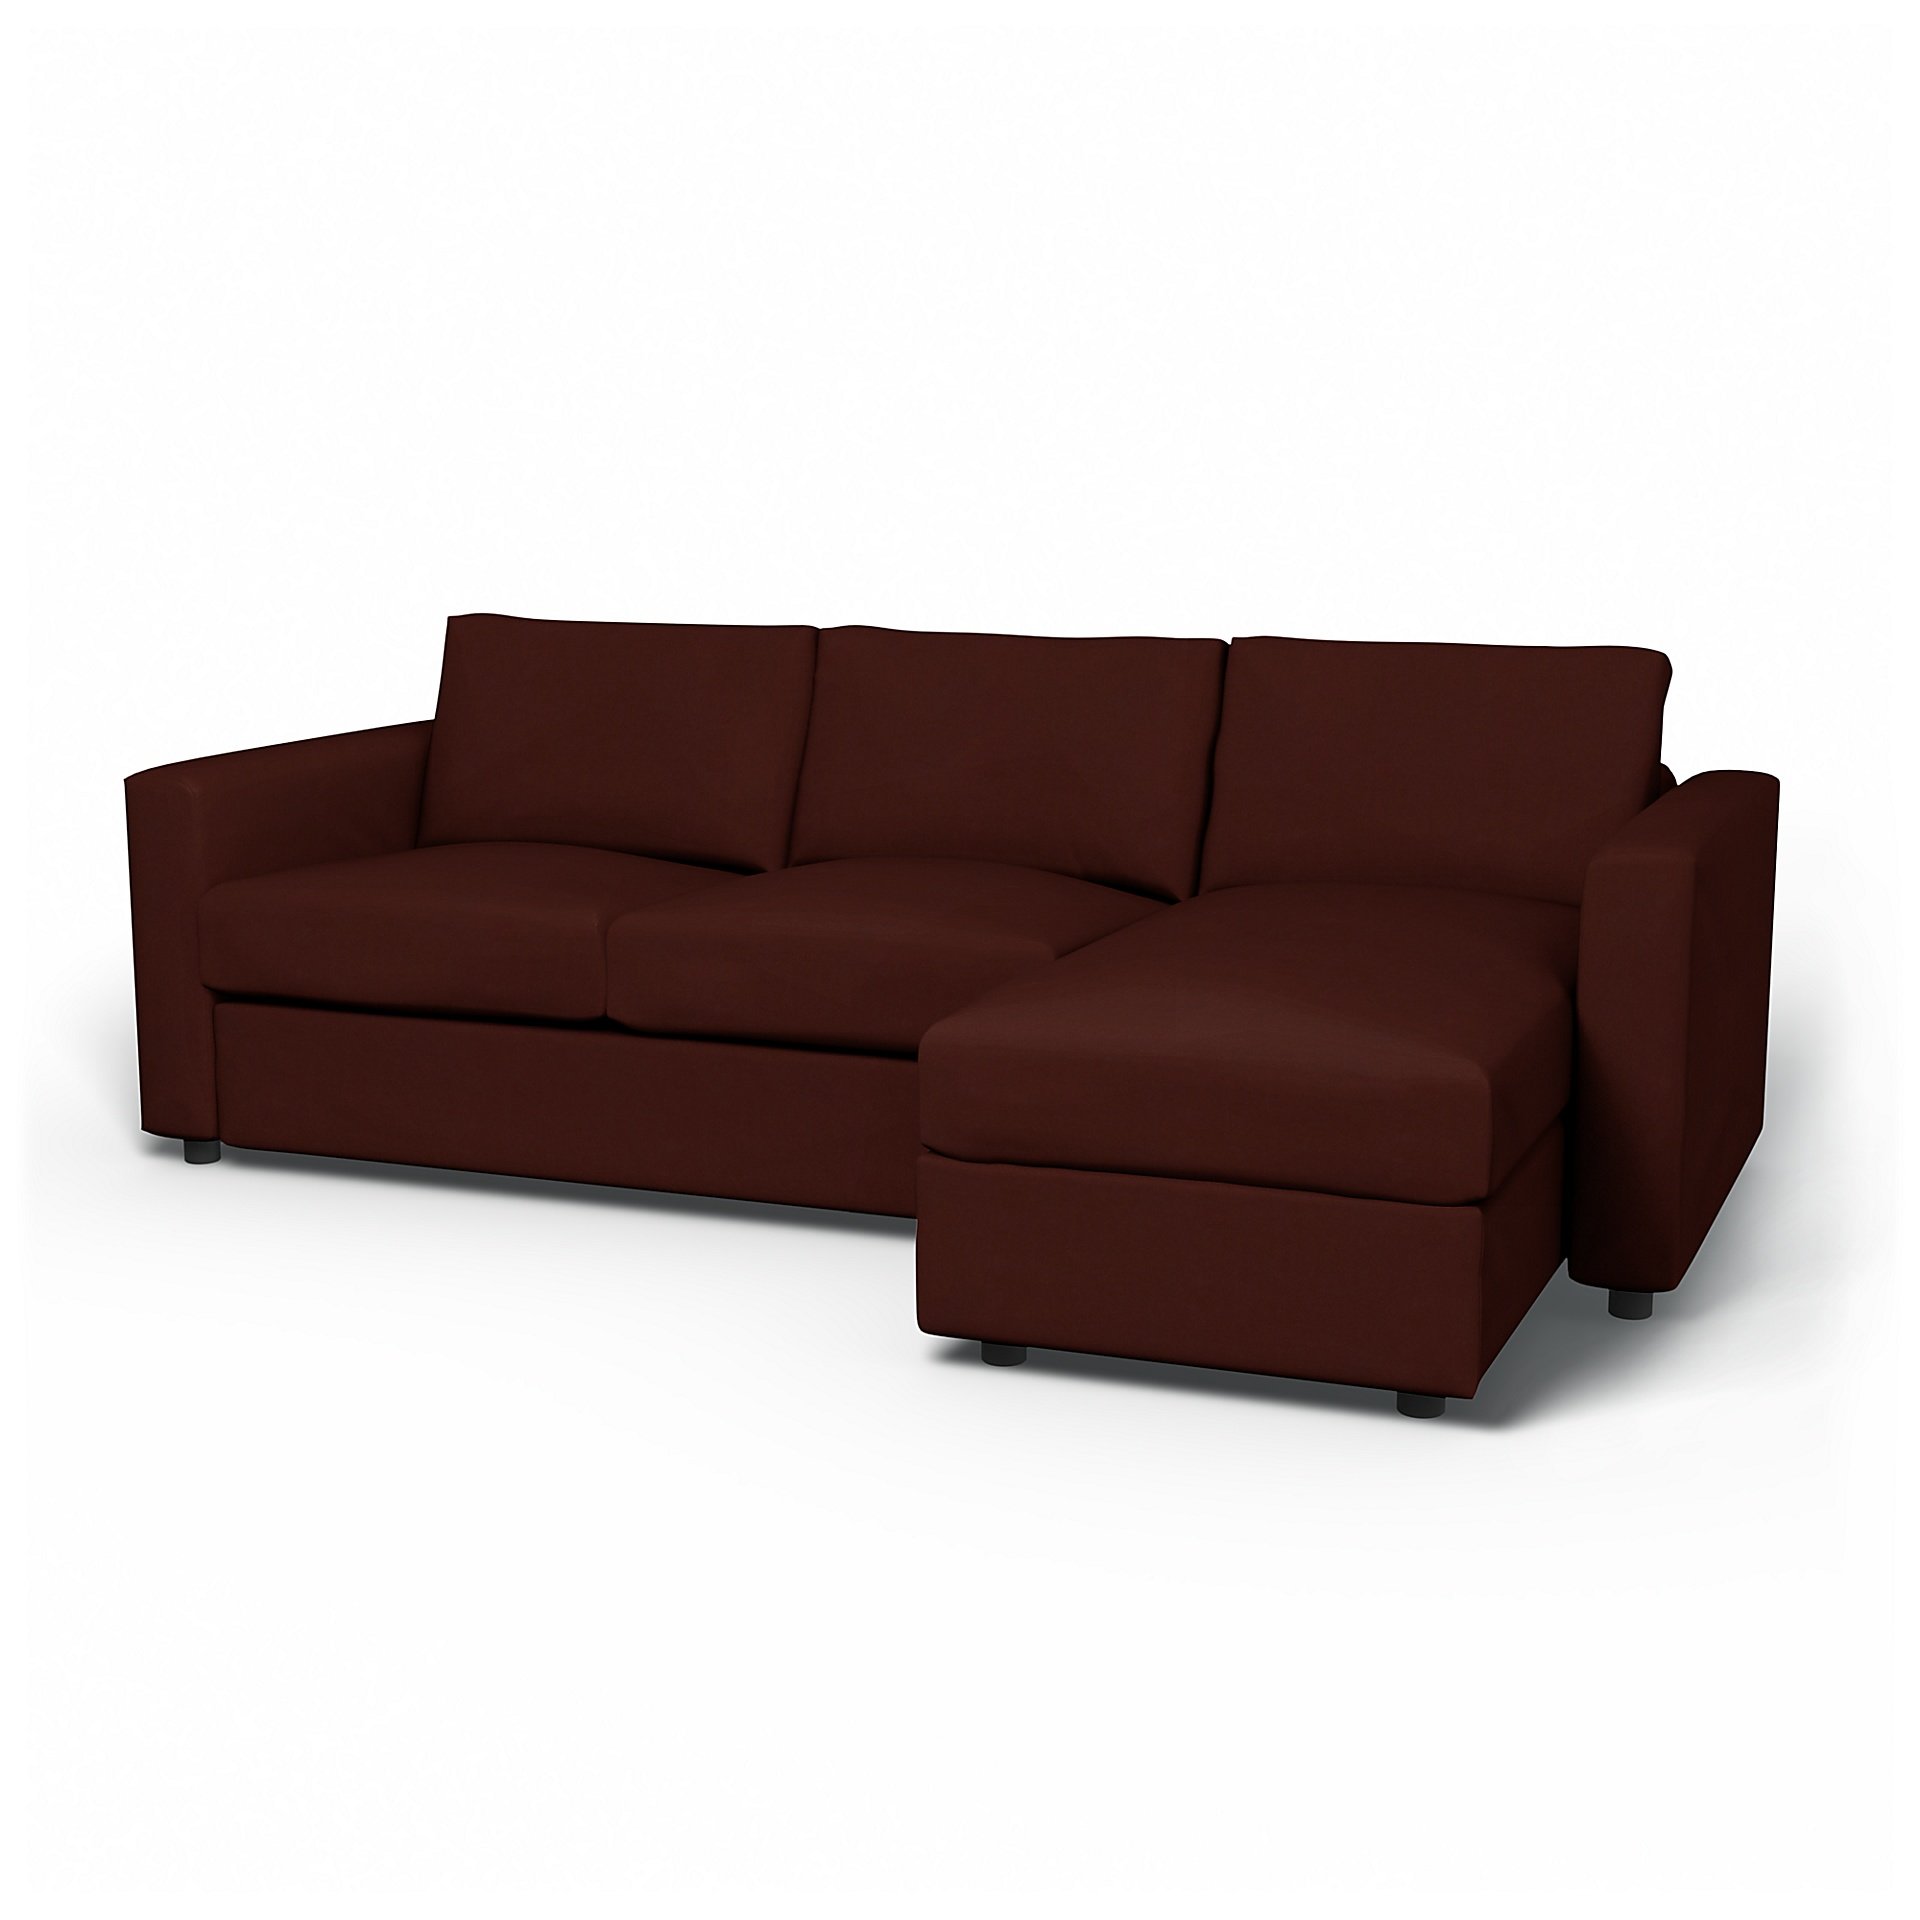 IKEA - Vimle 2 Seater Sofa with Chaise Cover, Ground Coffee, Velvet - Bemz